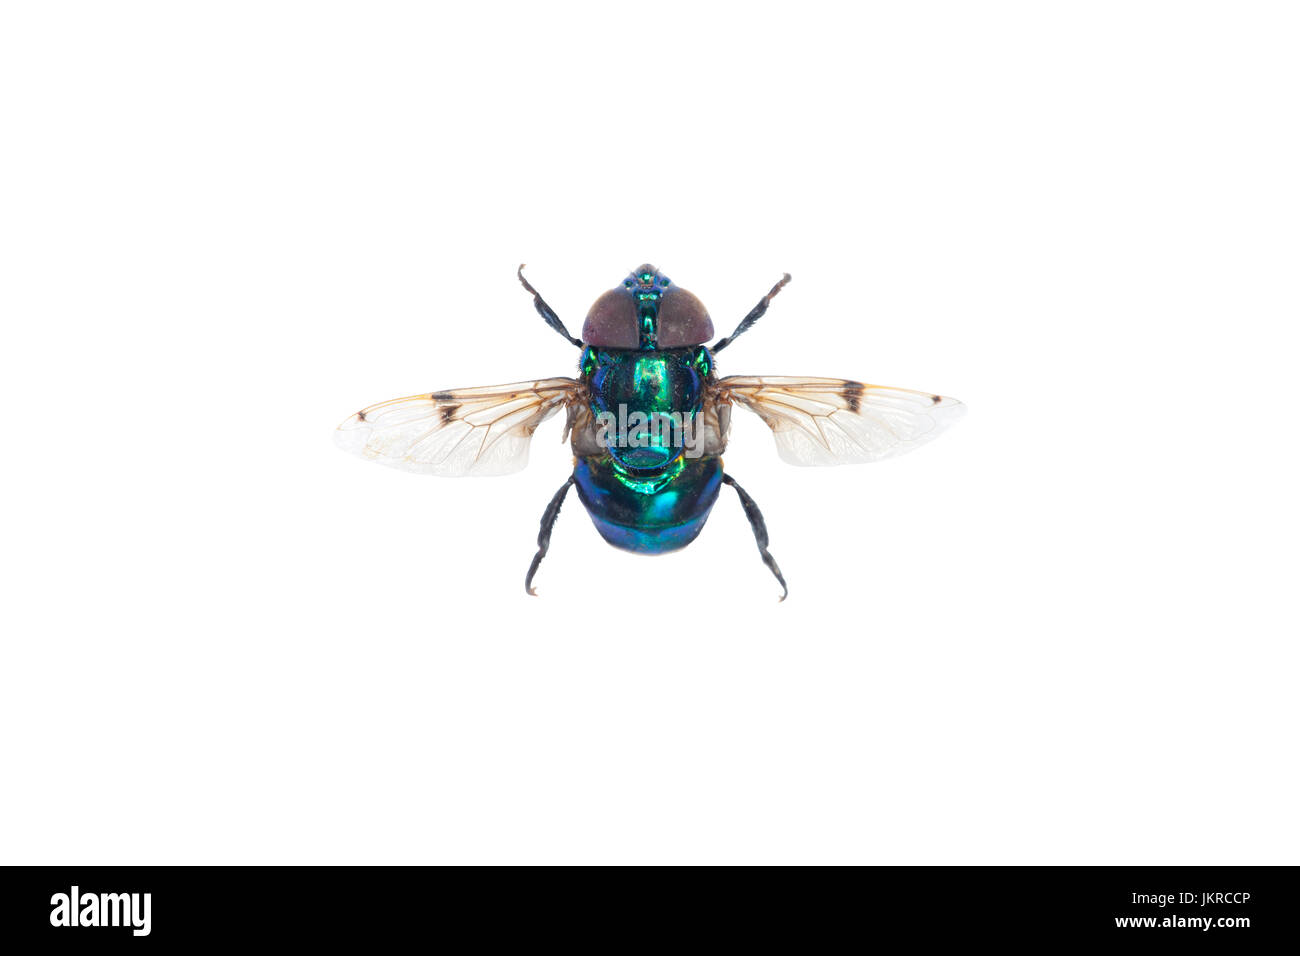 A beautiful iridescent fly on a white background (isolated). Stock Photo